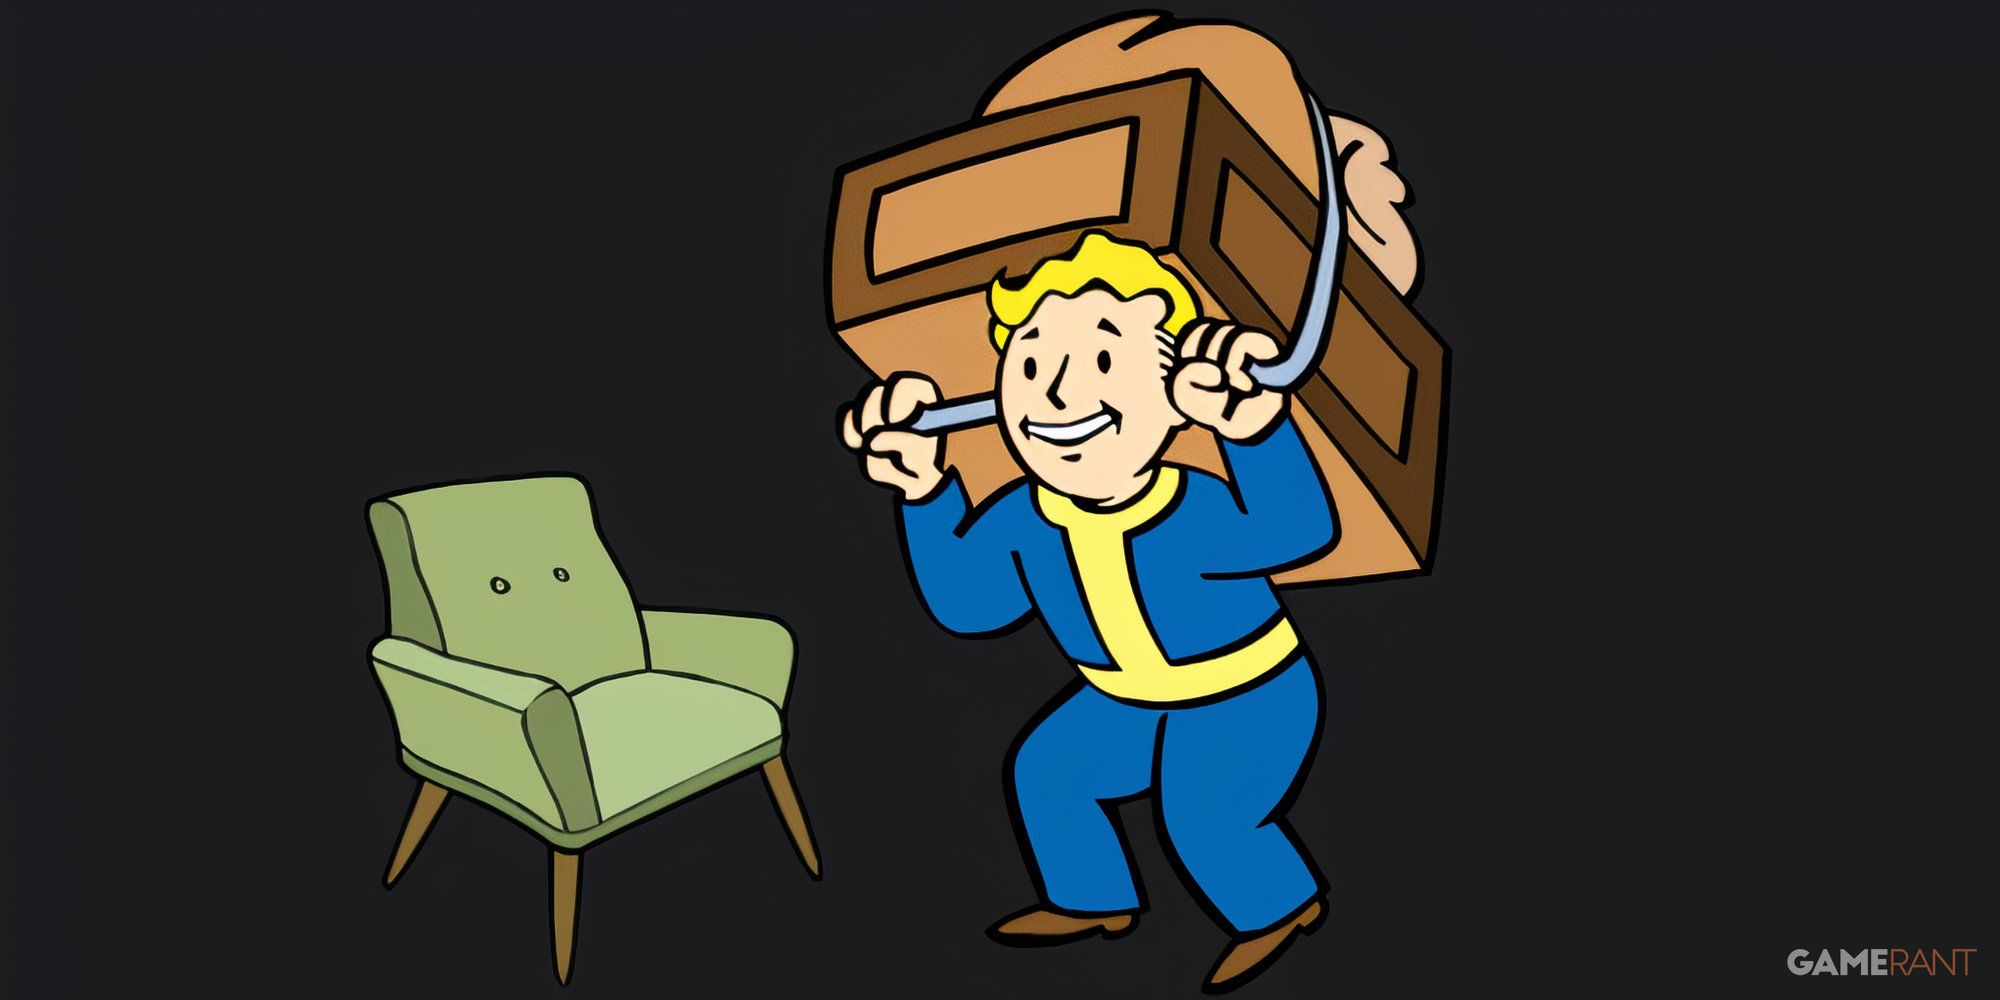 Vault Boy holds a giant box and bag over his head